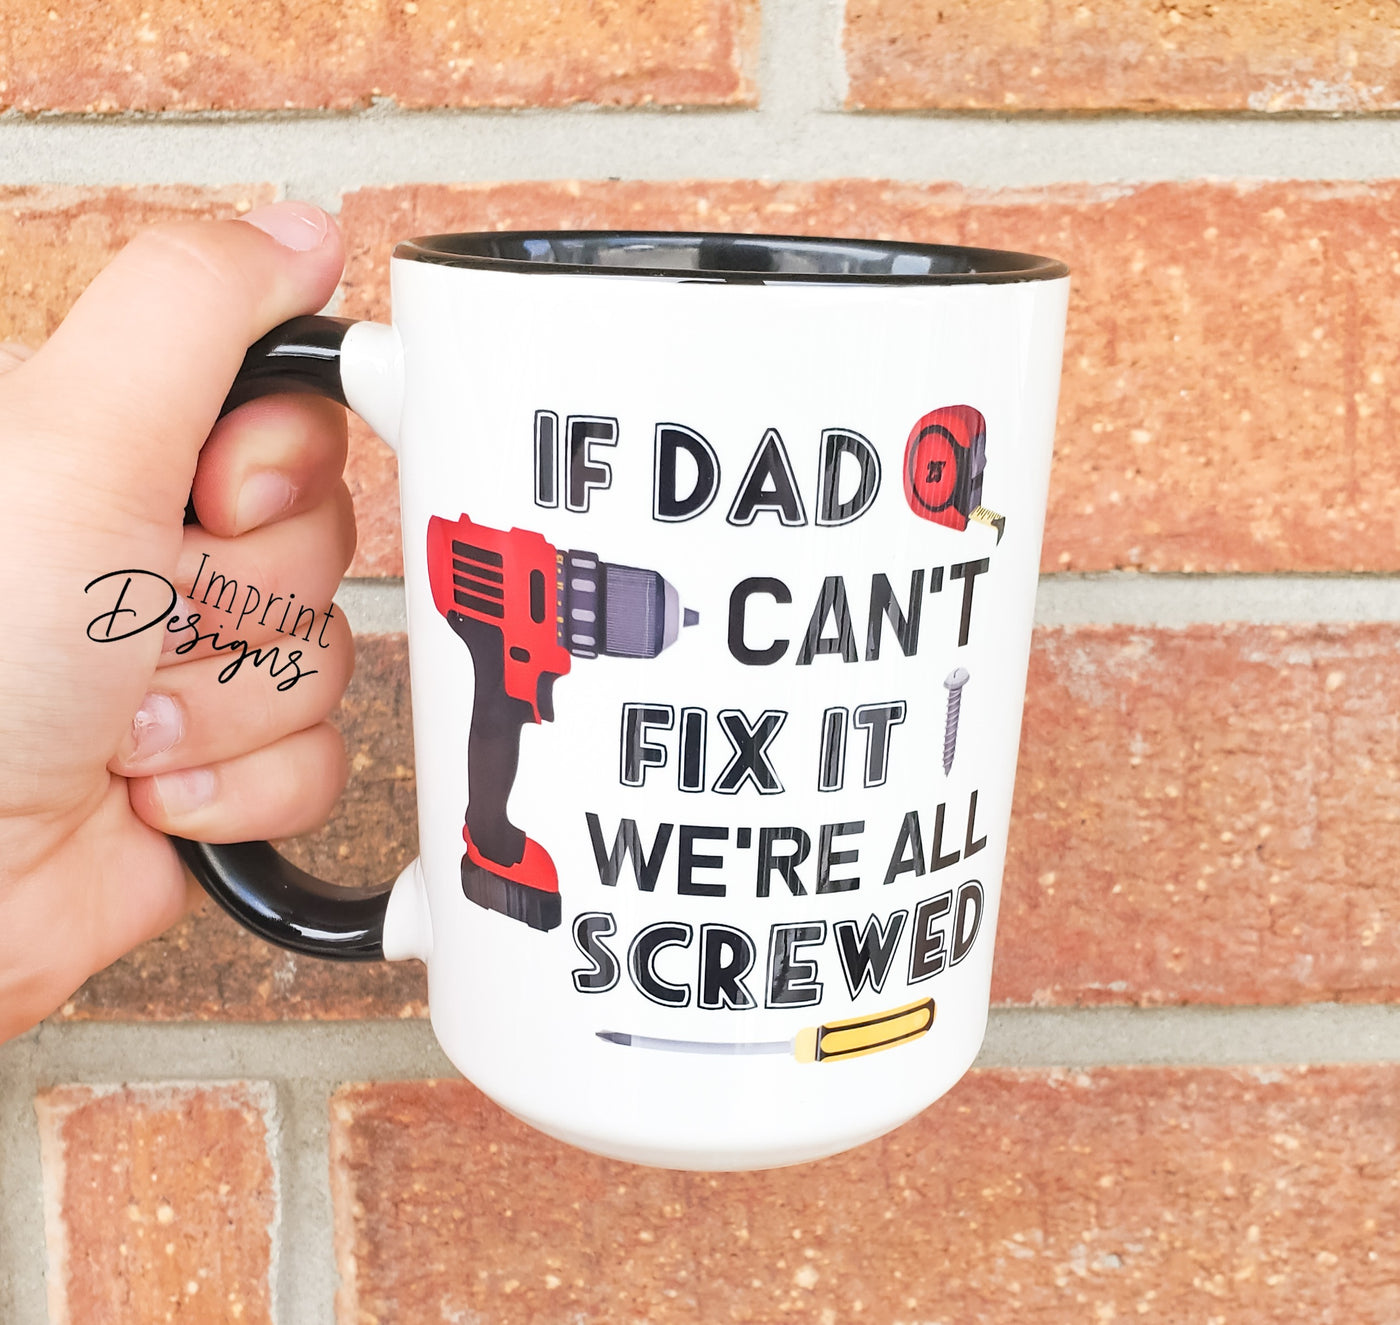 If Dad can't fix it